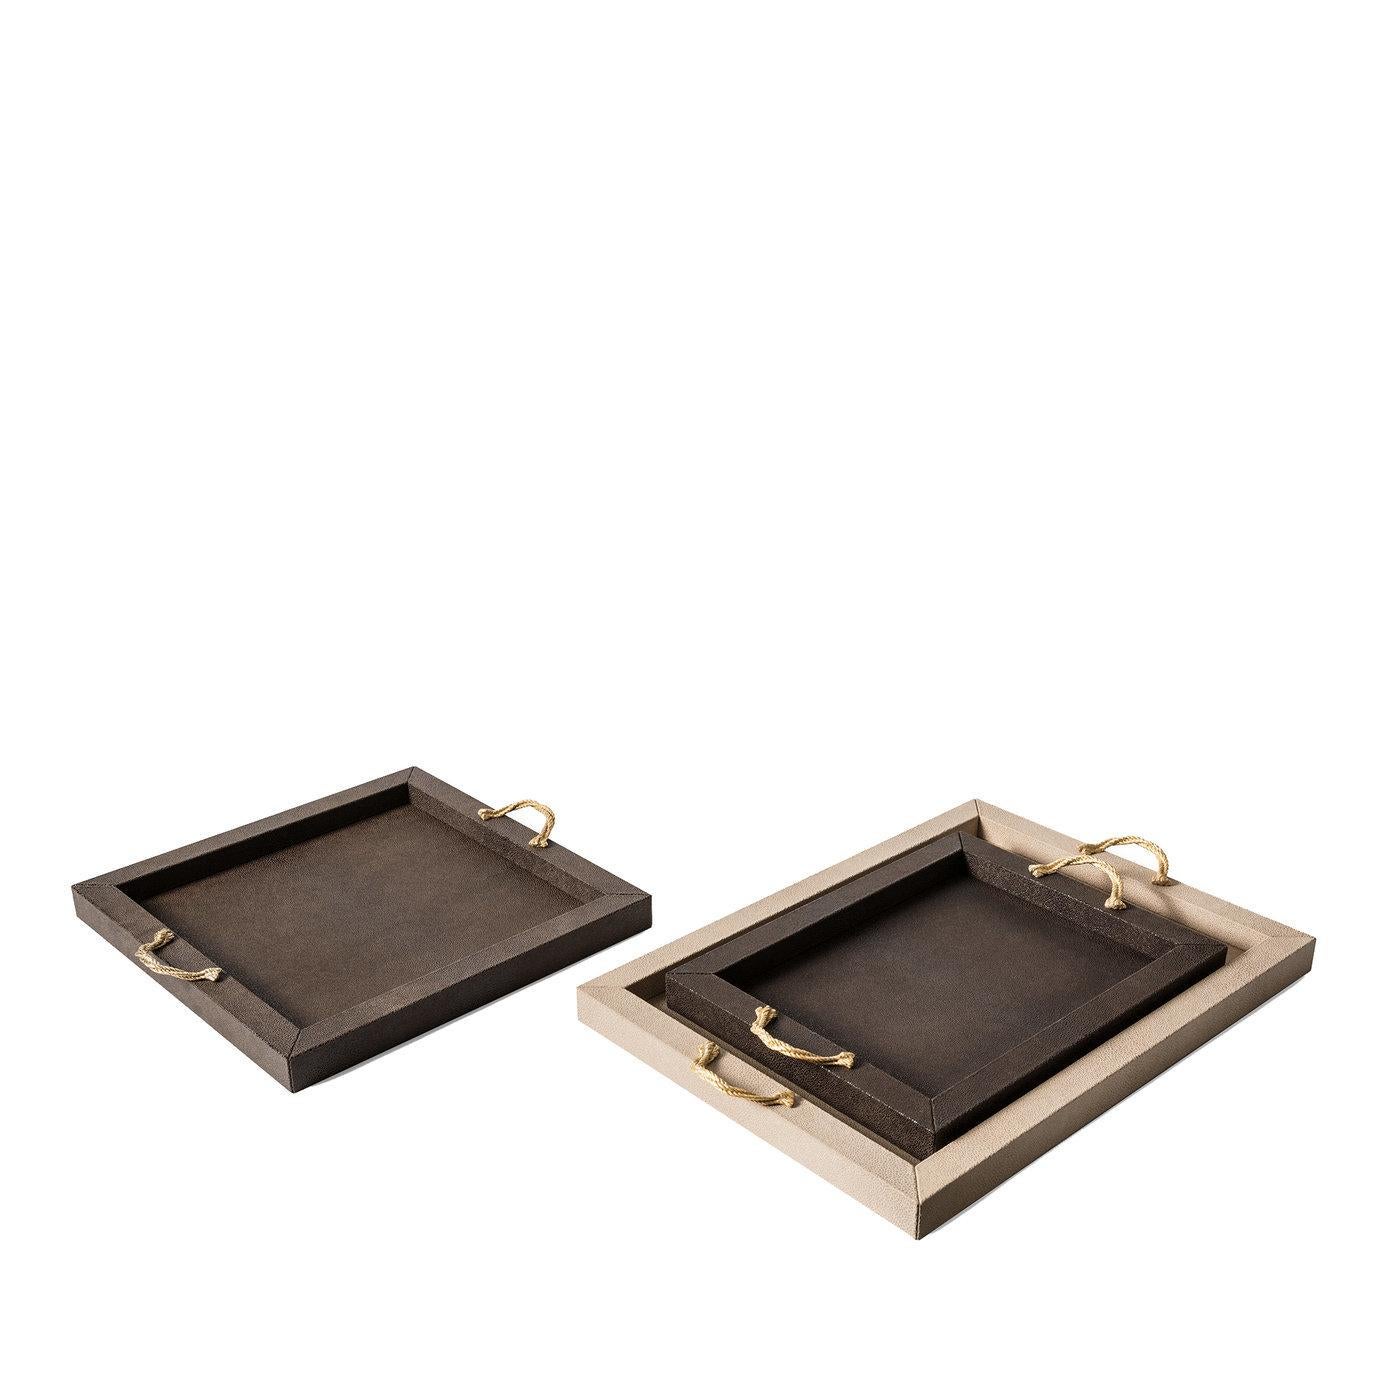 Italian Thalia Small Rectangular Tray with 24K Gold For Sale